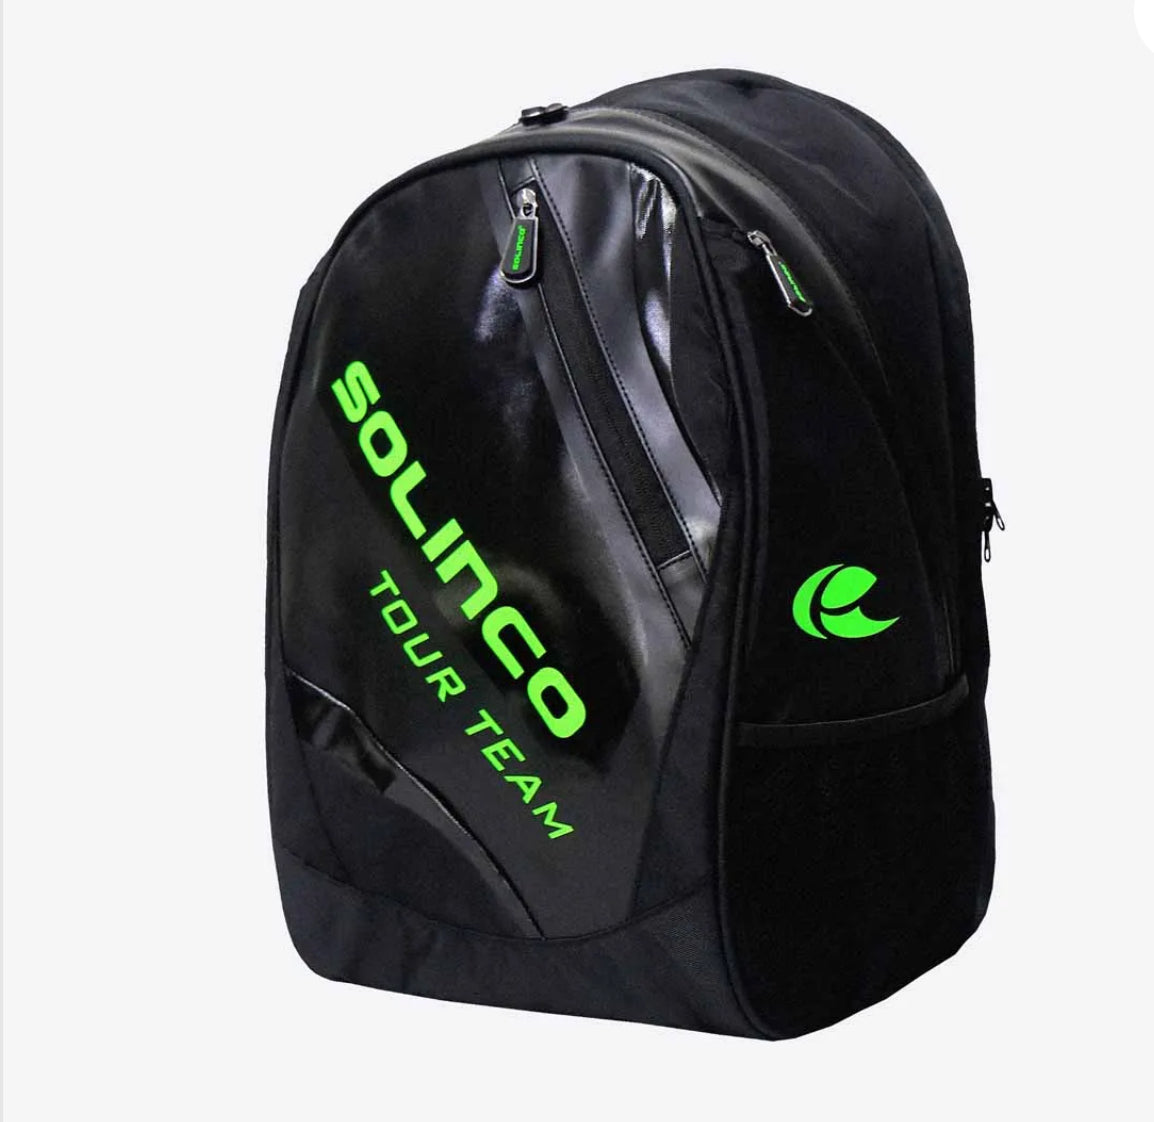 Solinco Tour Backpack